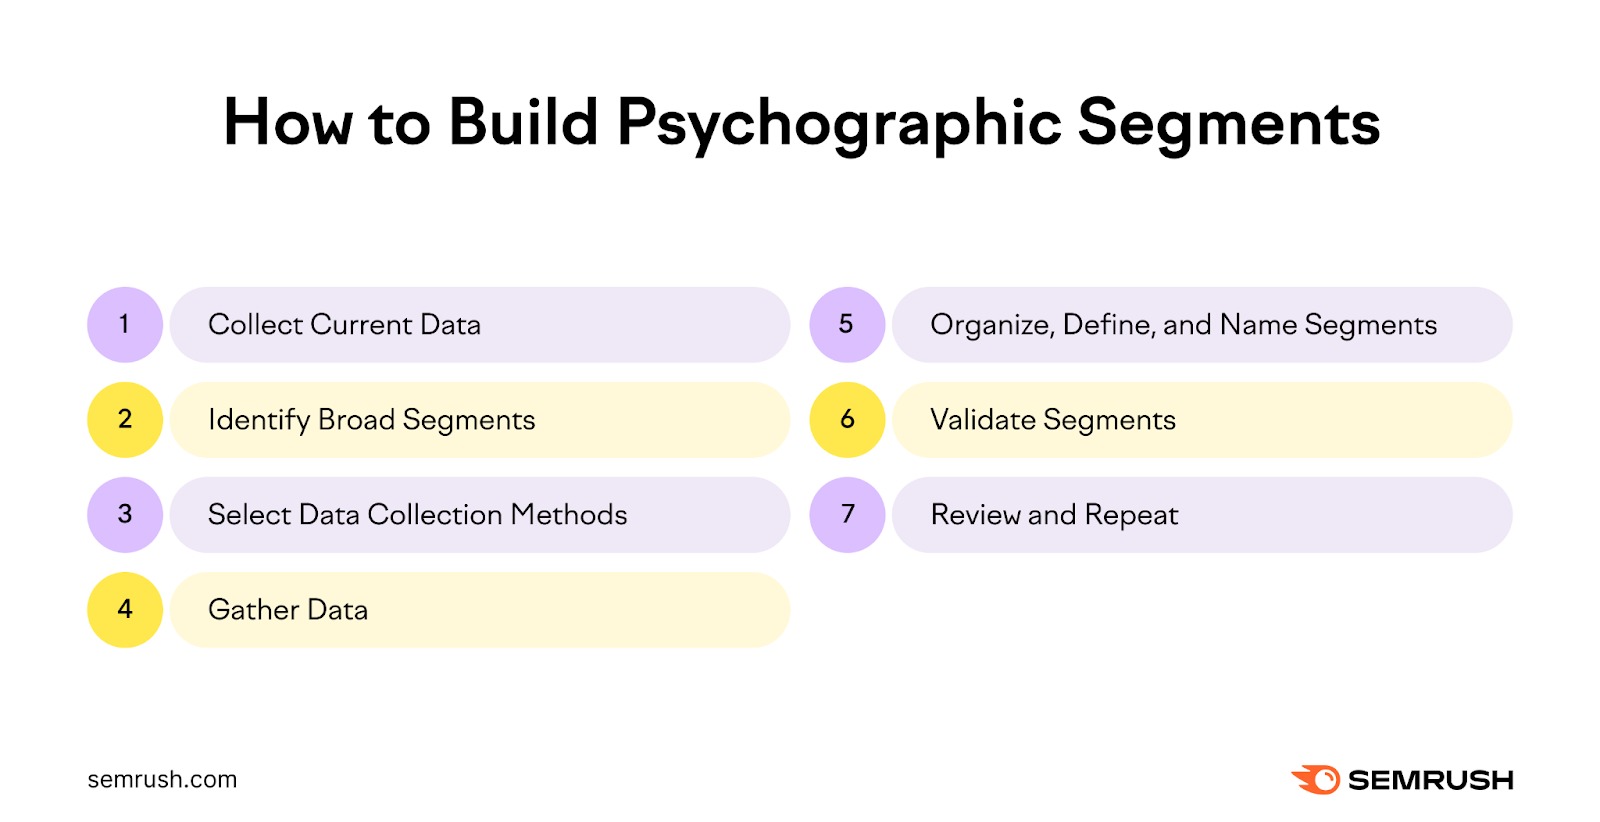 How to build psychographic segments